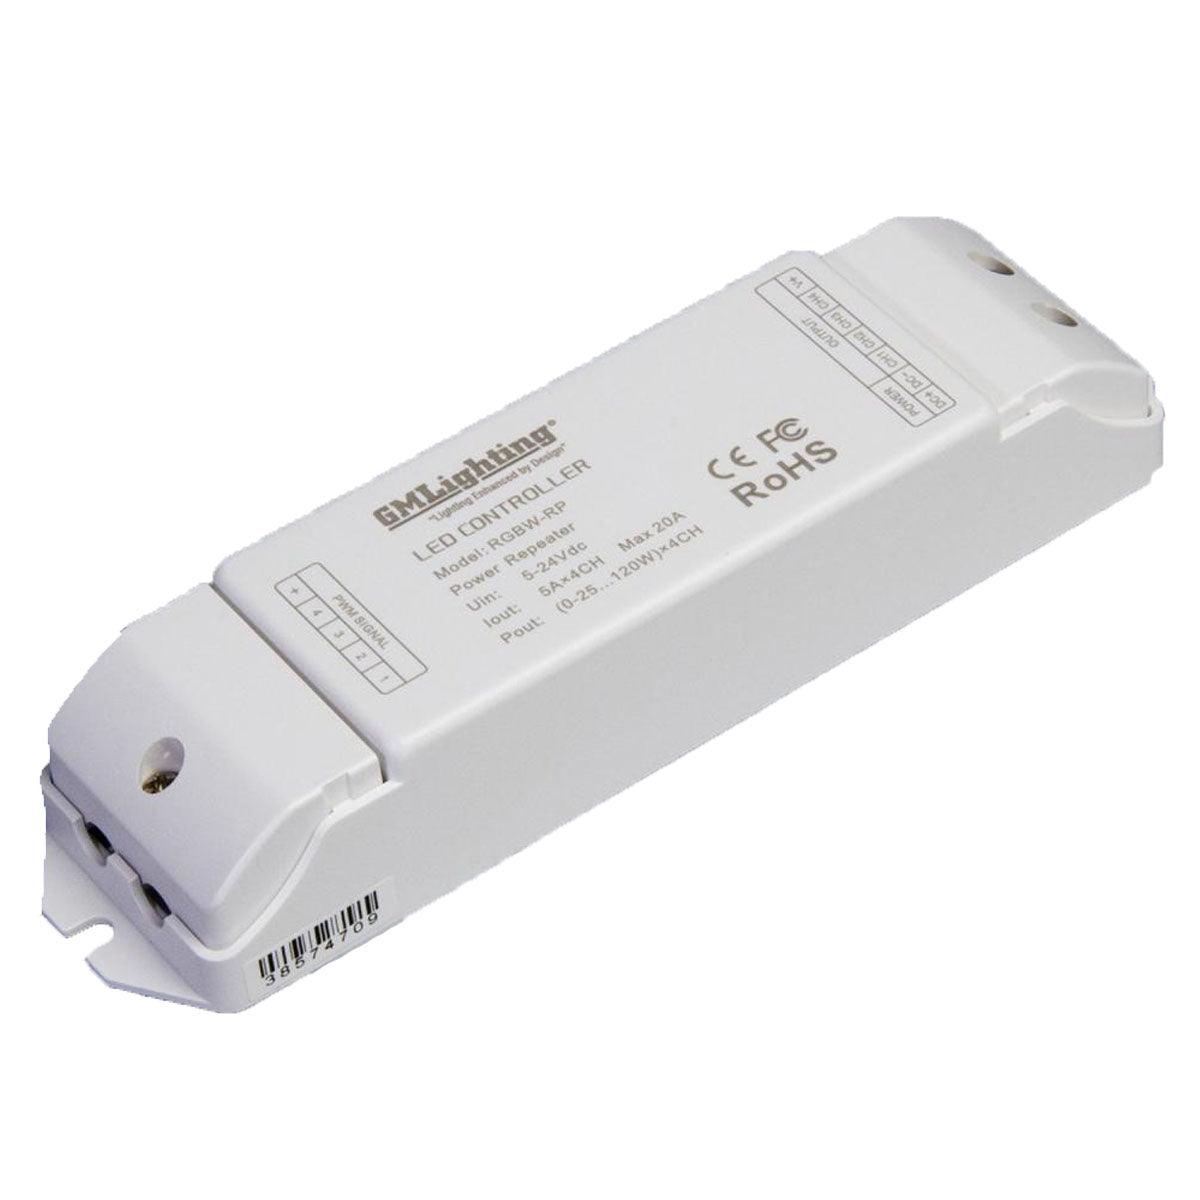 RGBW LED Repeater For LTR RGBW Strip Lights, 4 Channels